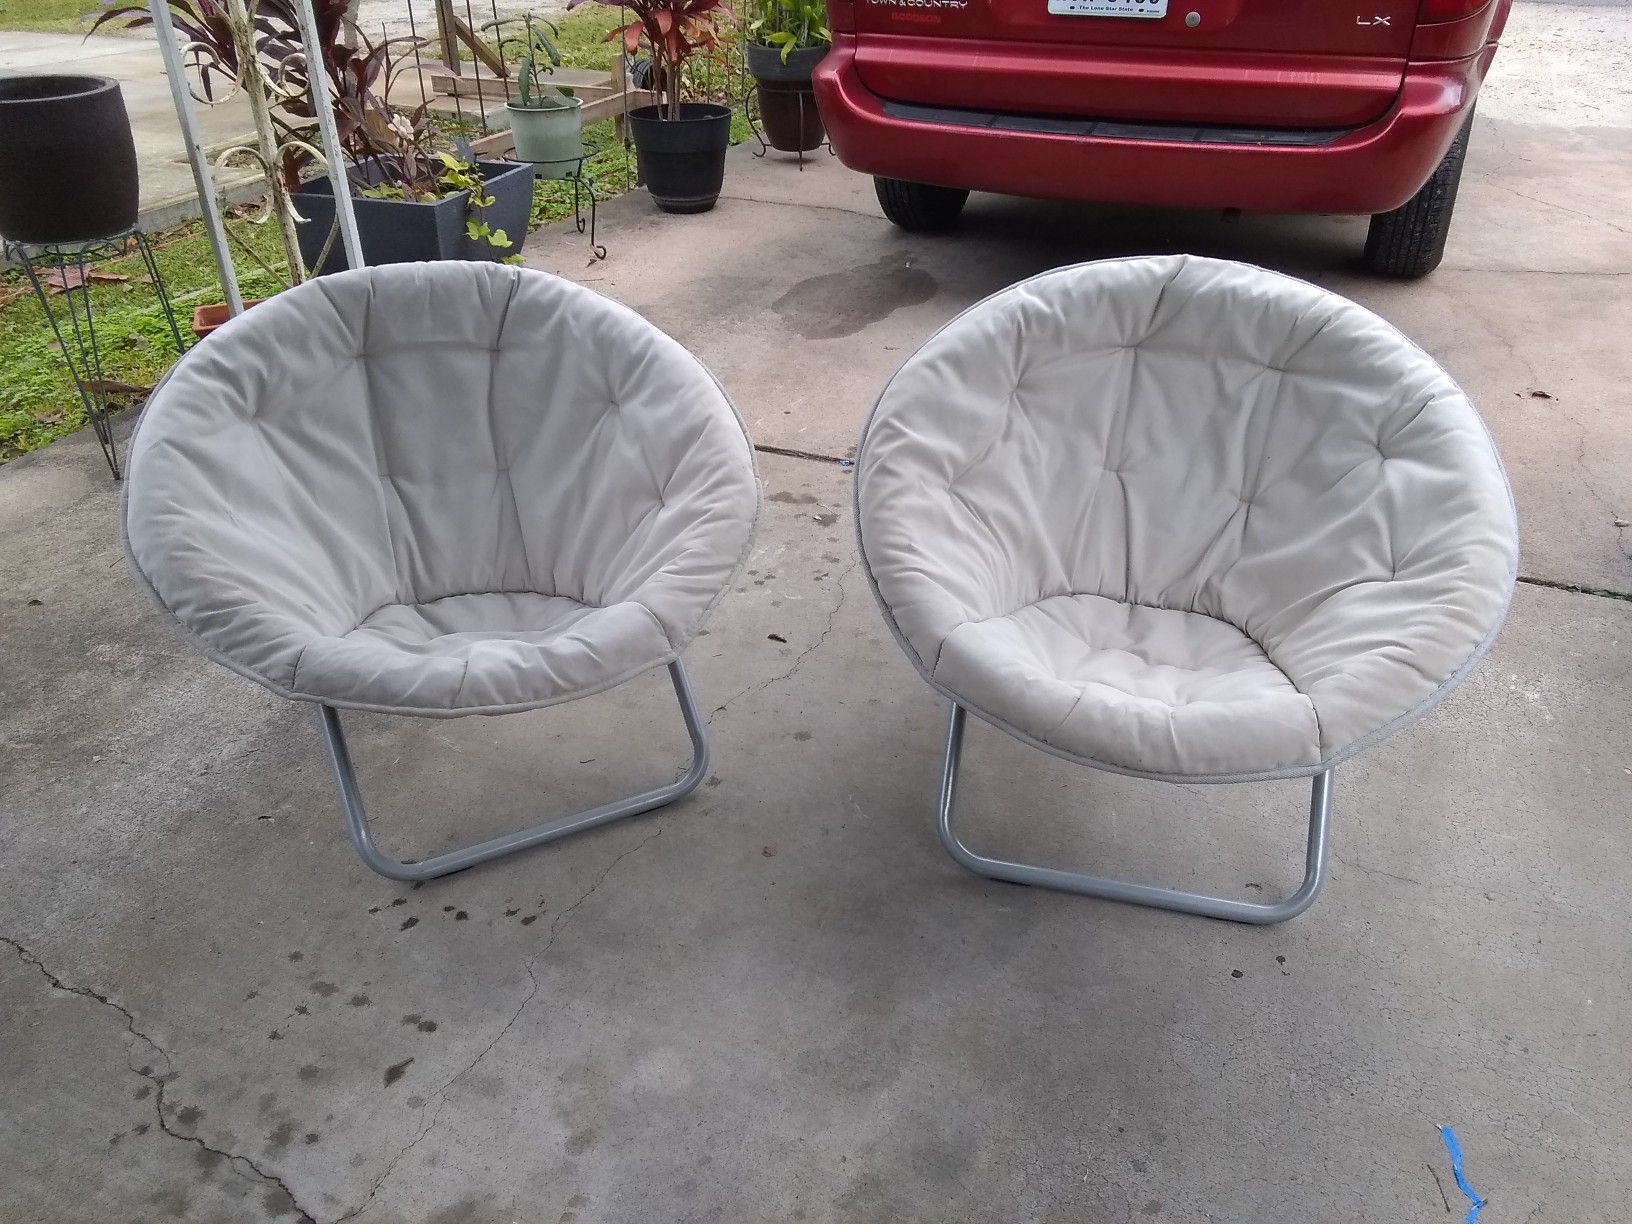 Two nice used outdoor foldable chairs.